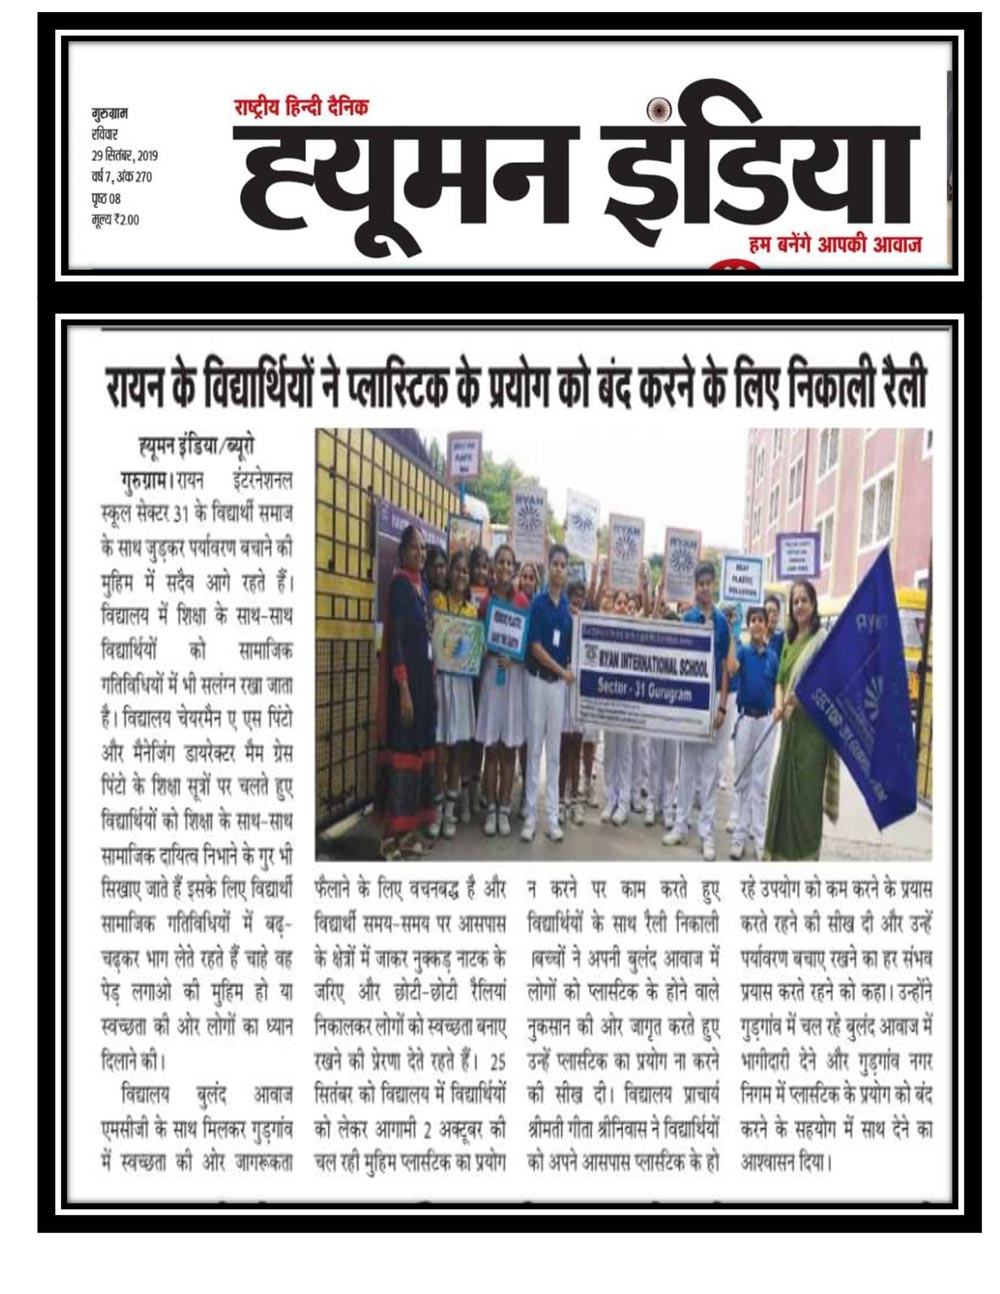 Students carry out a rally to stop the usage of plastic - Ryan International School, Sec 31 Gurgaon - Ryan Group